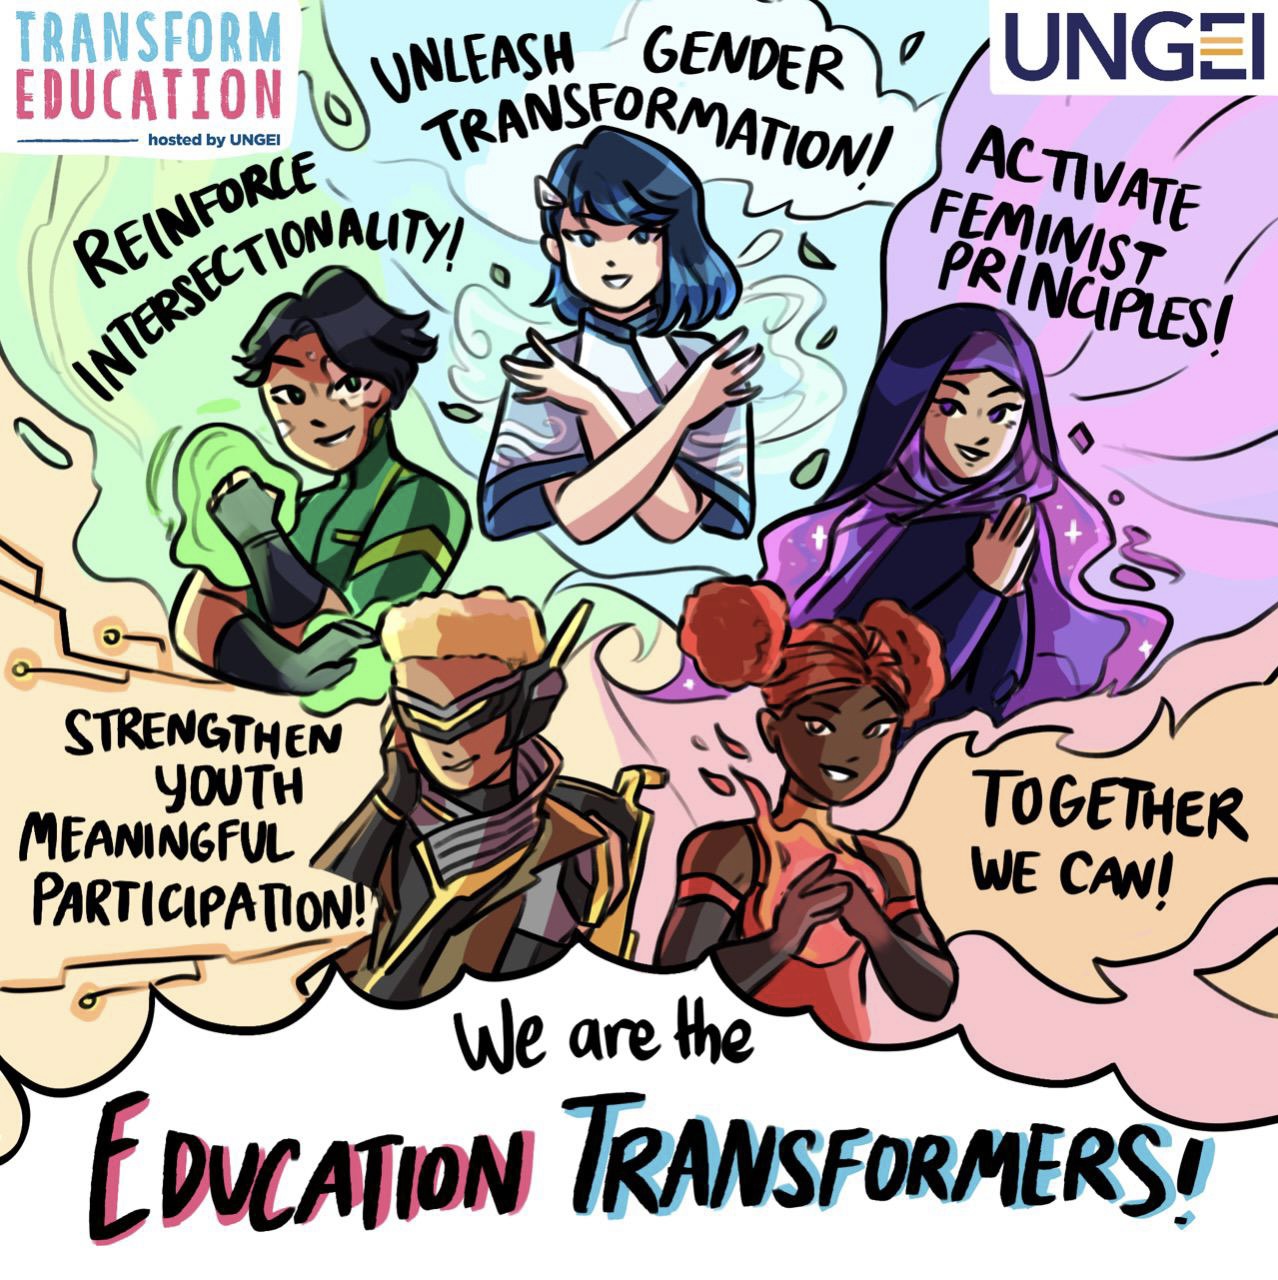 Education Transformers are saving the world